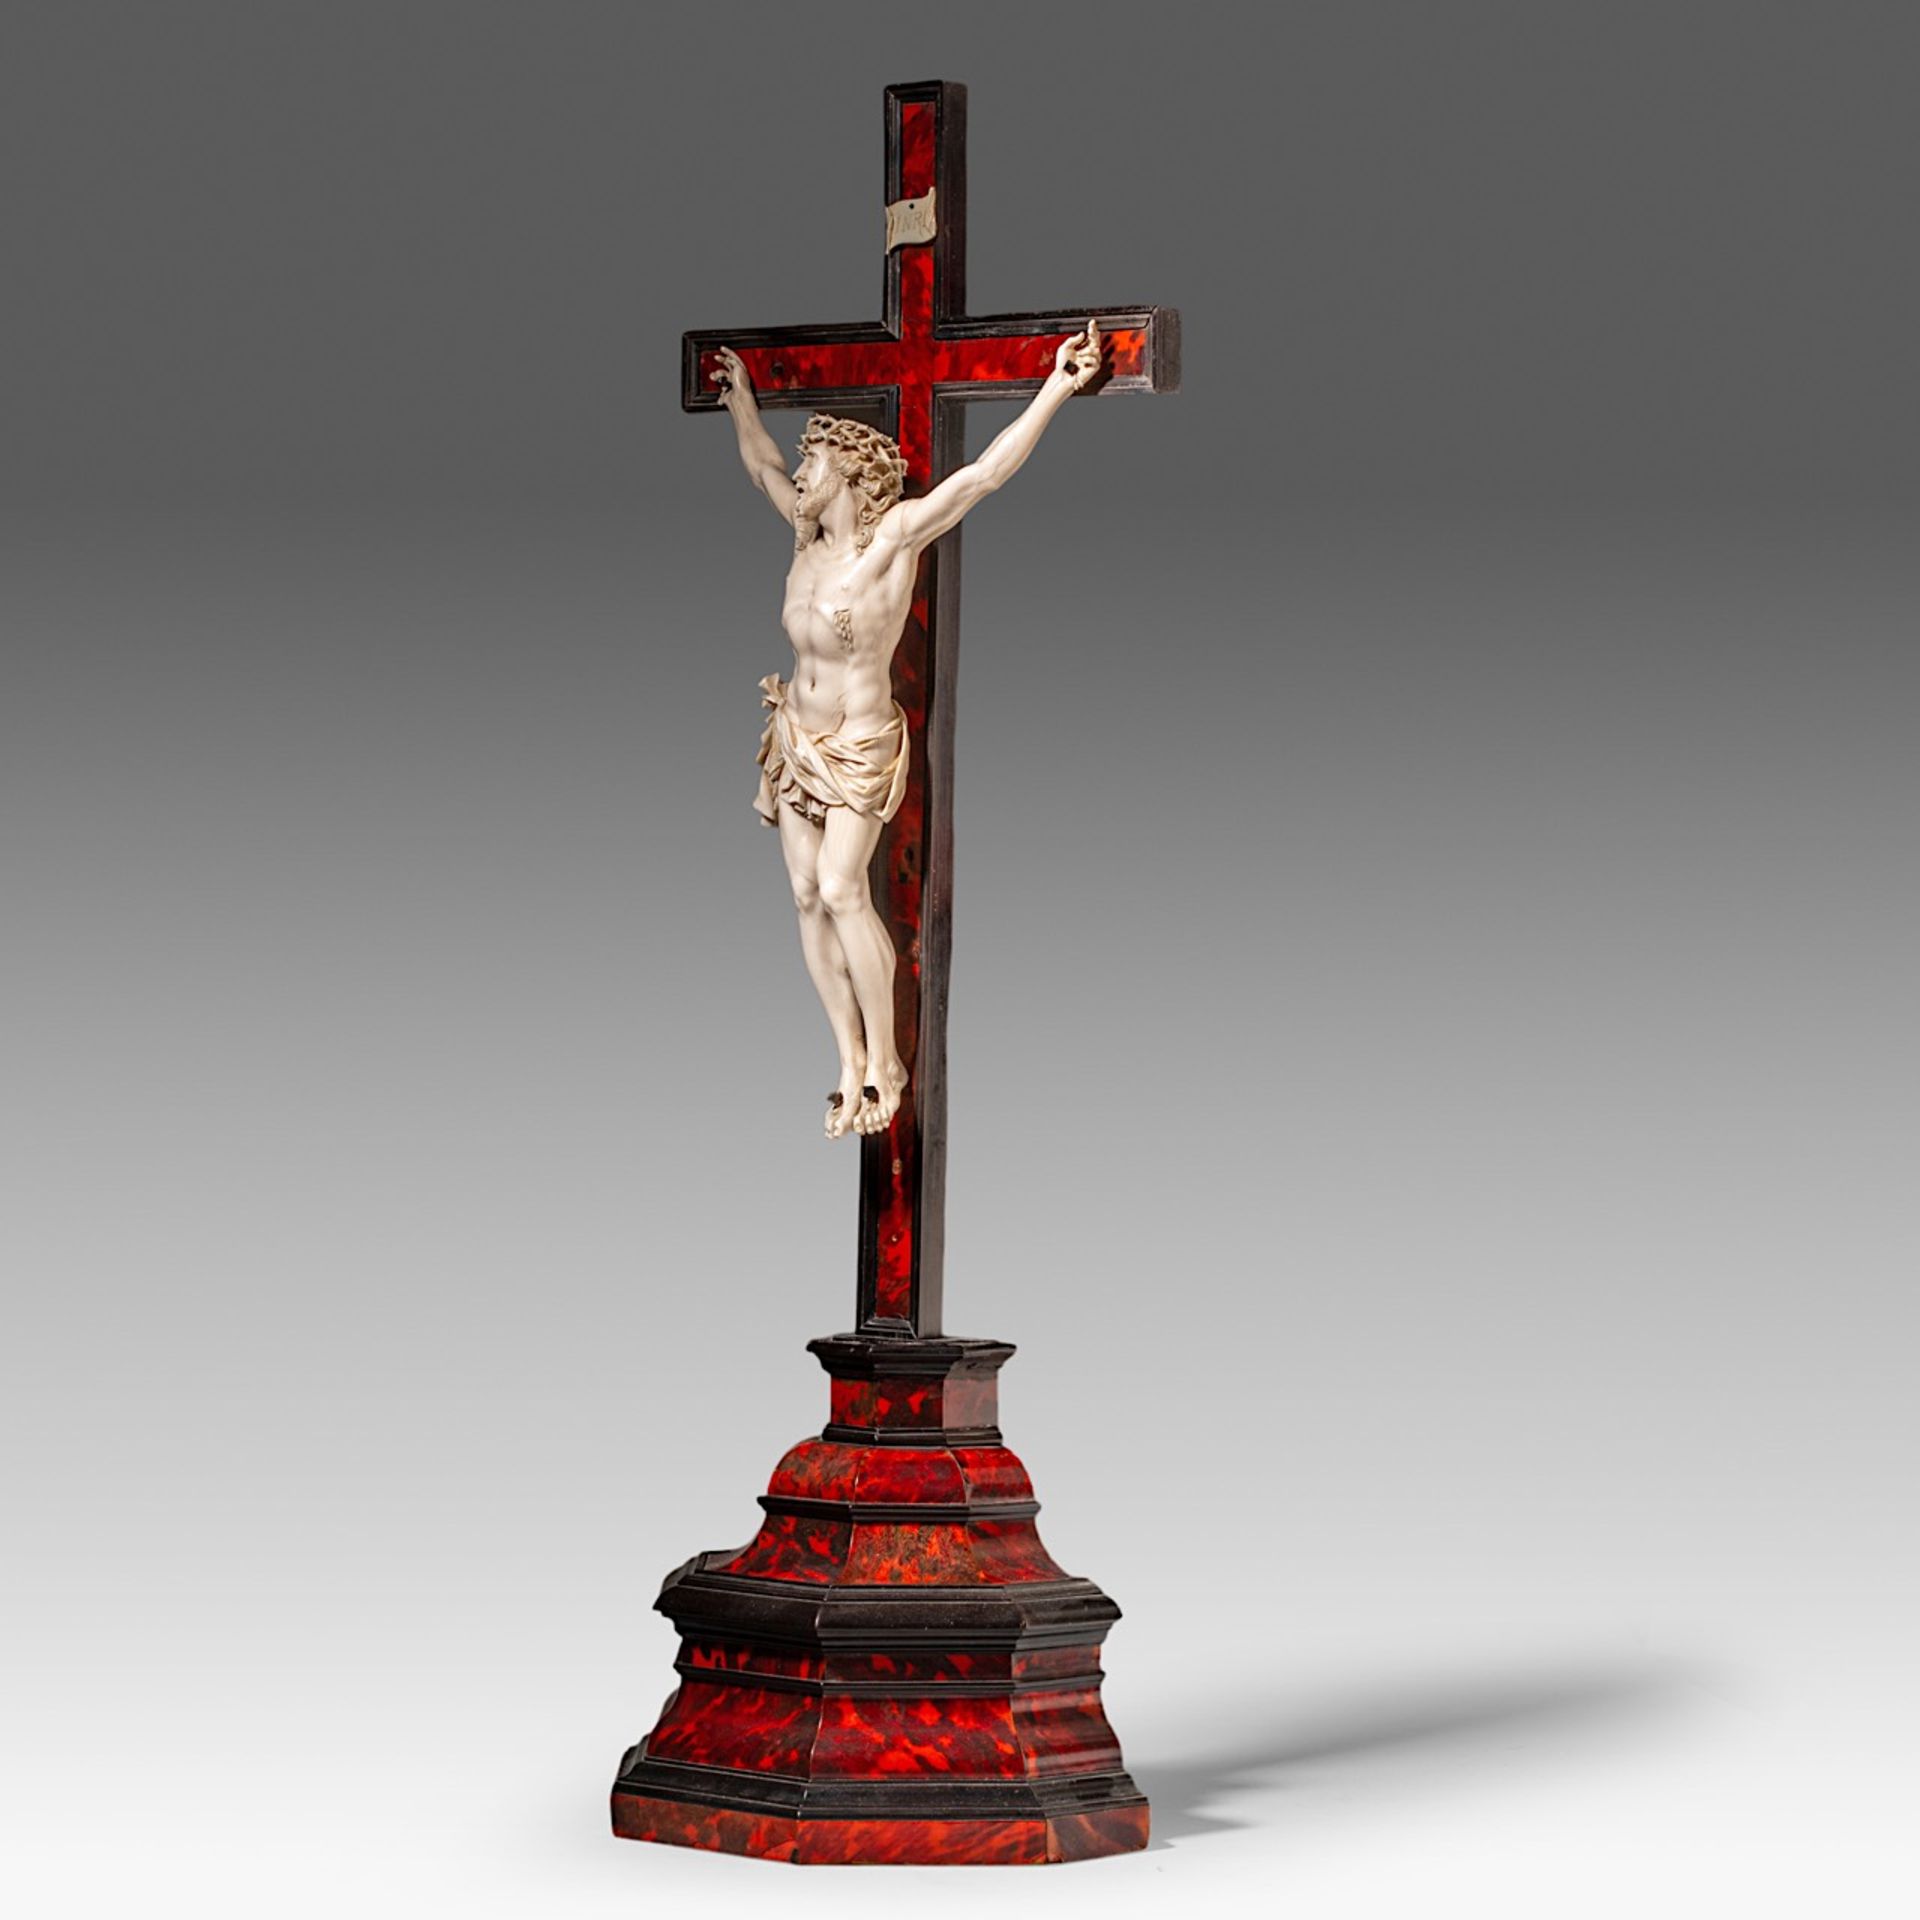 A 19th-century ivory corpus Christi, H corpus 35 cm - total H 76 cm - total weight 2189 g (+) - Image 2 of 5